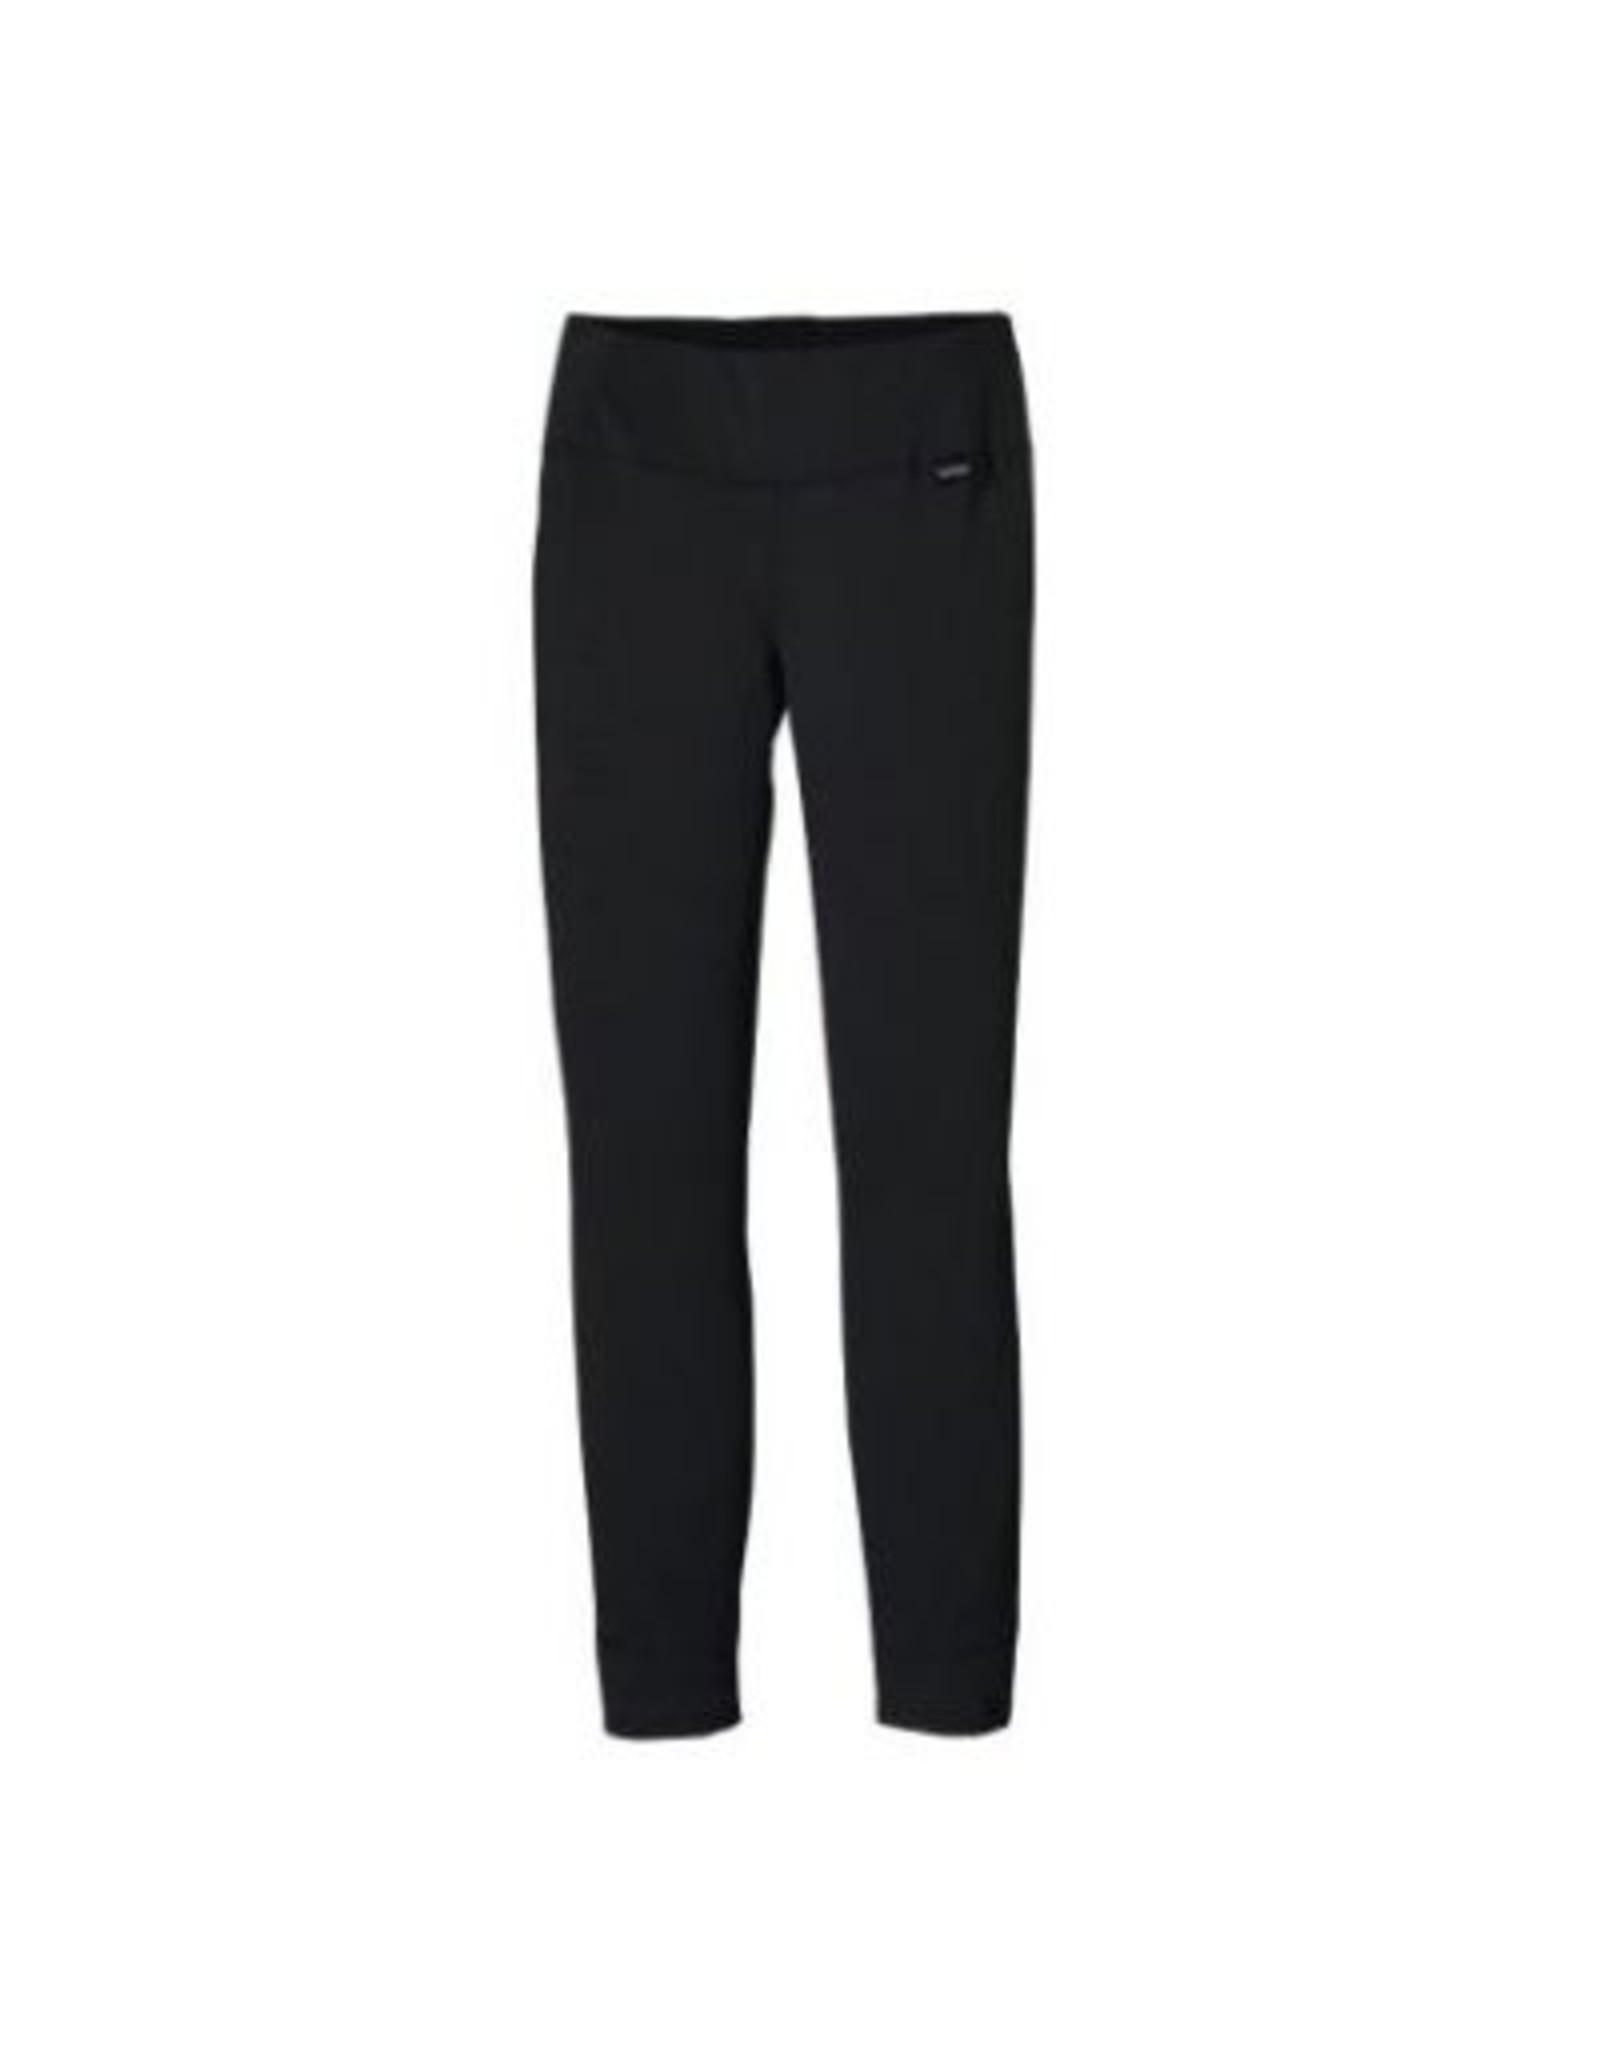 Patagonia Women's Patagonia Capilene Midweight Bottoms, Size L (Closeout)